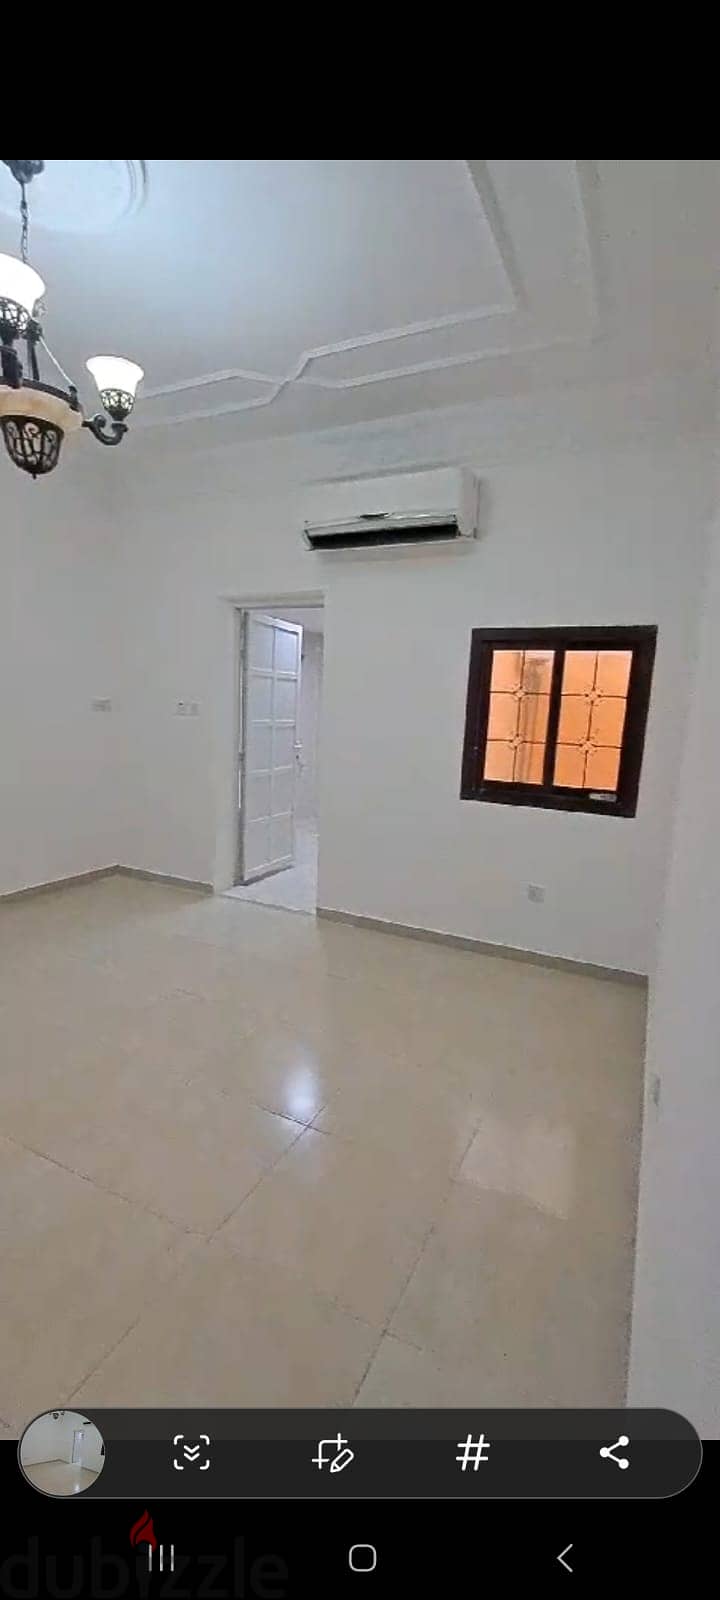 For rent flat (Ground floor apartment) in compound in Al Nasr 3bhk 3